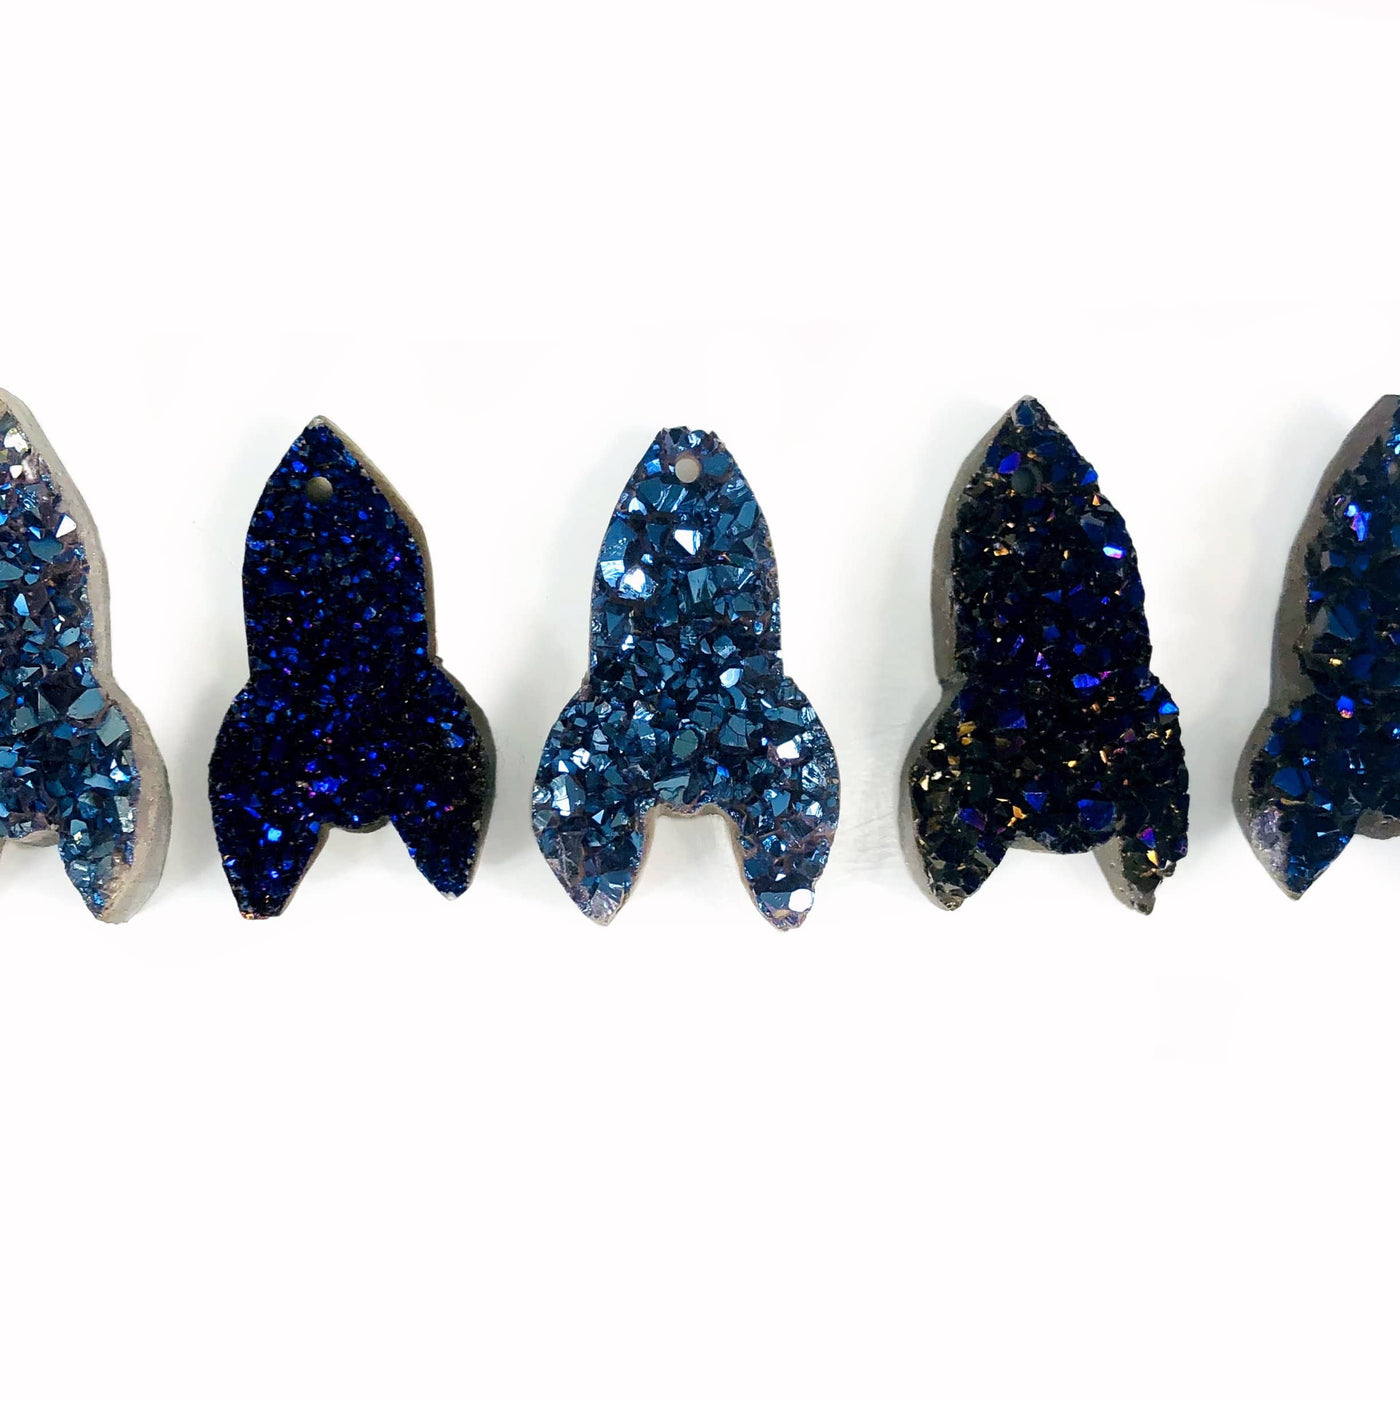 Druzy Rocket Shaped Cabochons  - blue in a row